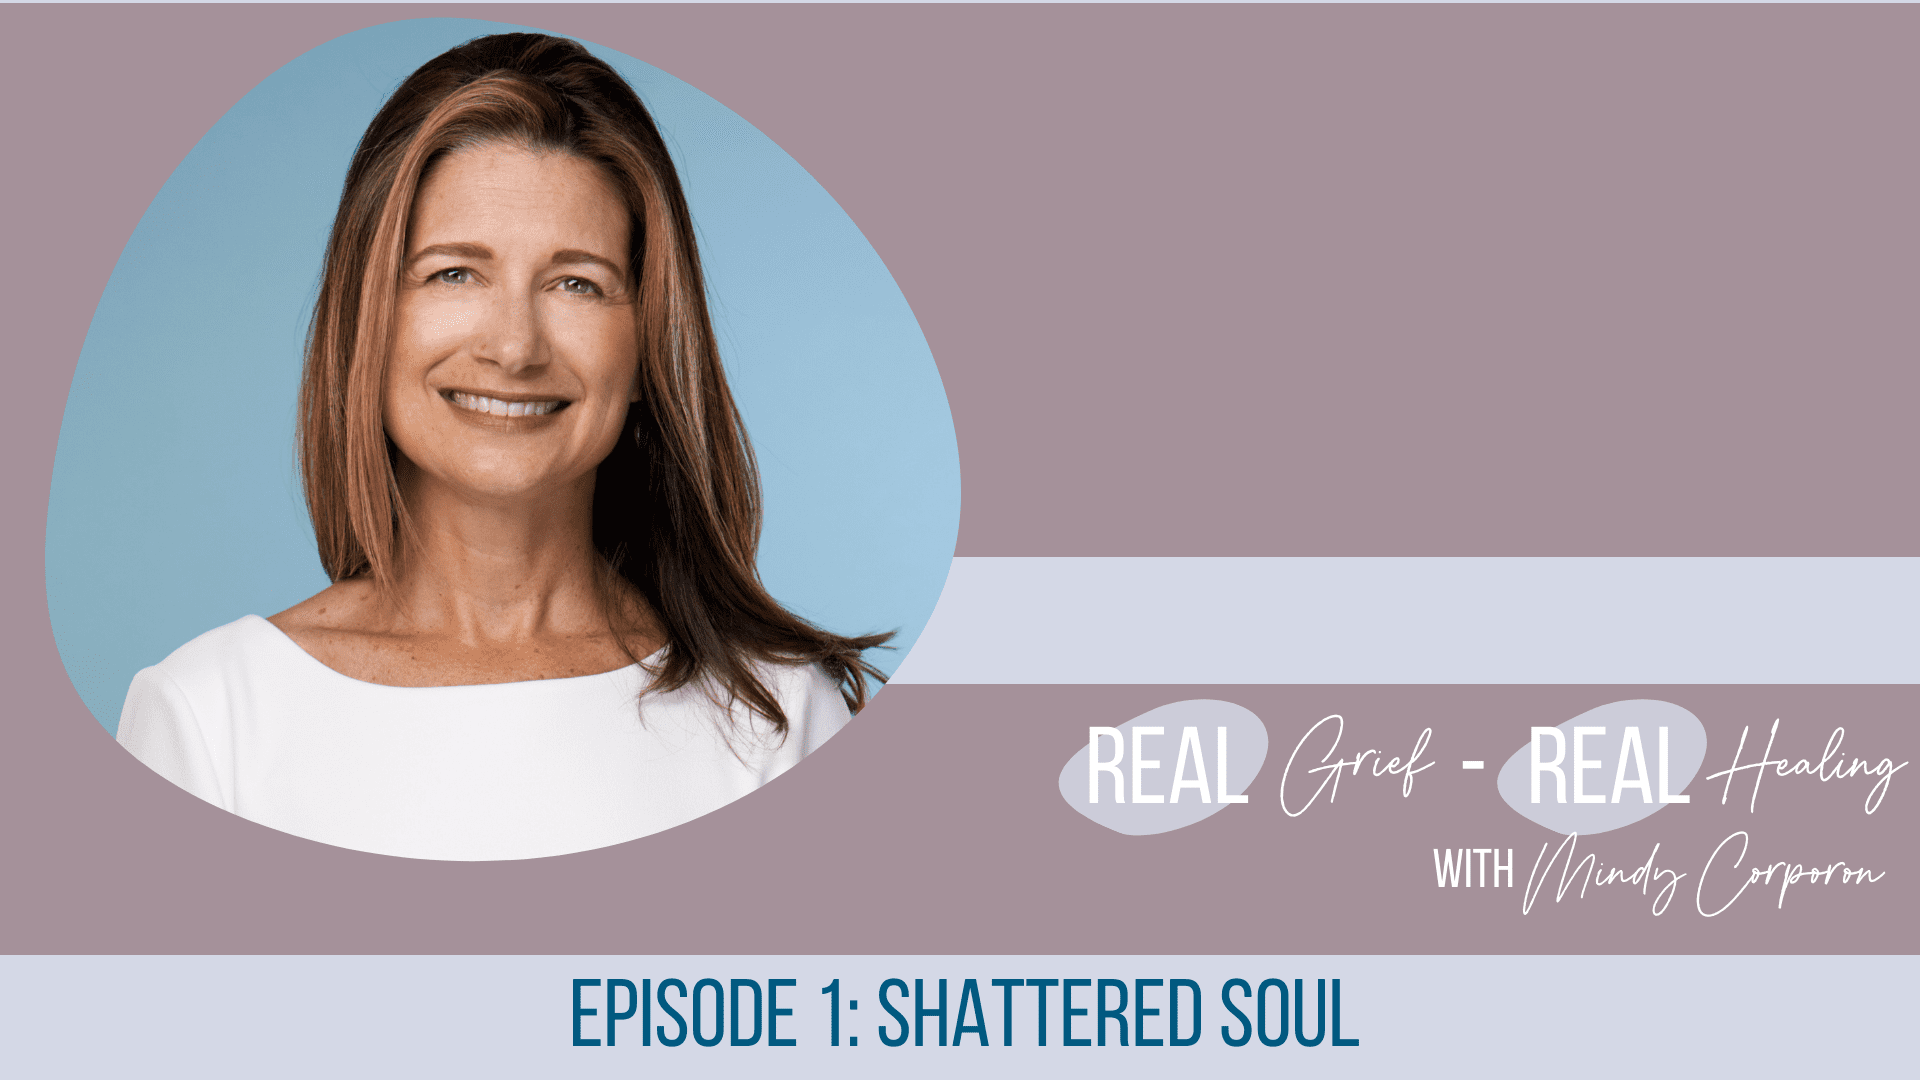 Real Grief Real Healing, Grief, Healing, mindy corporon, world shattered,